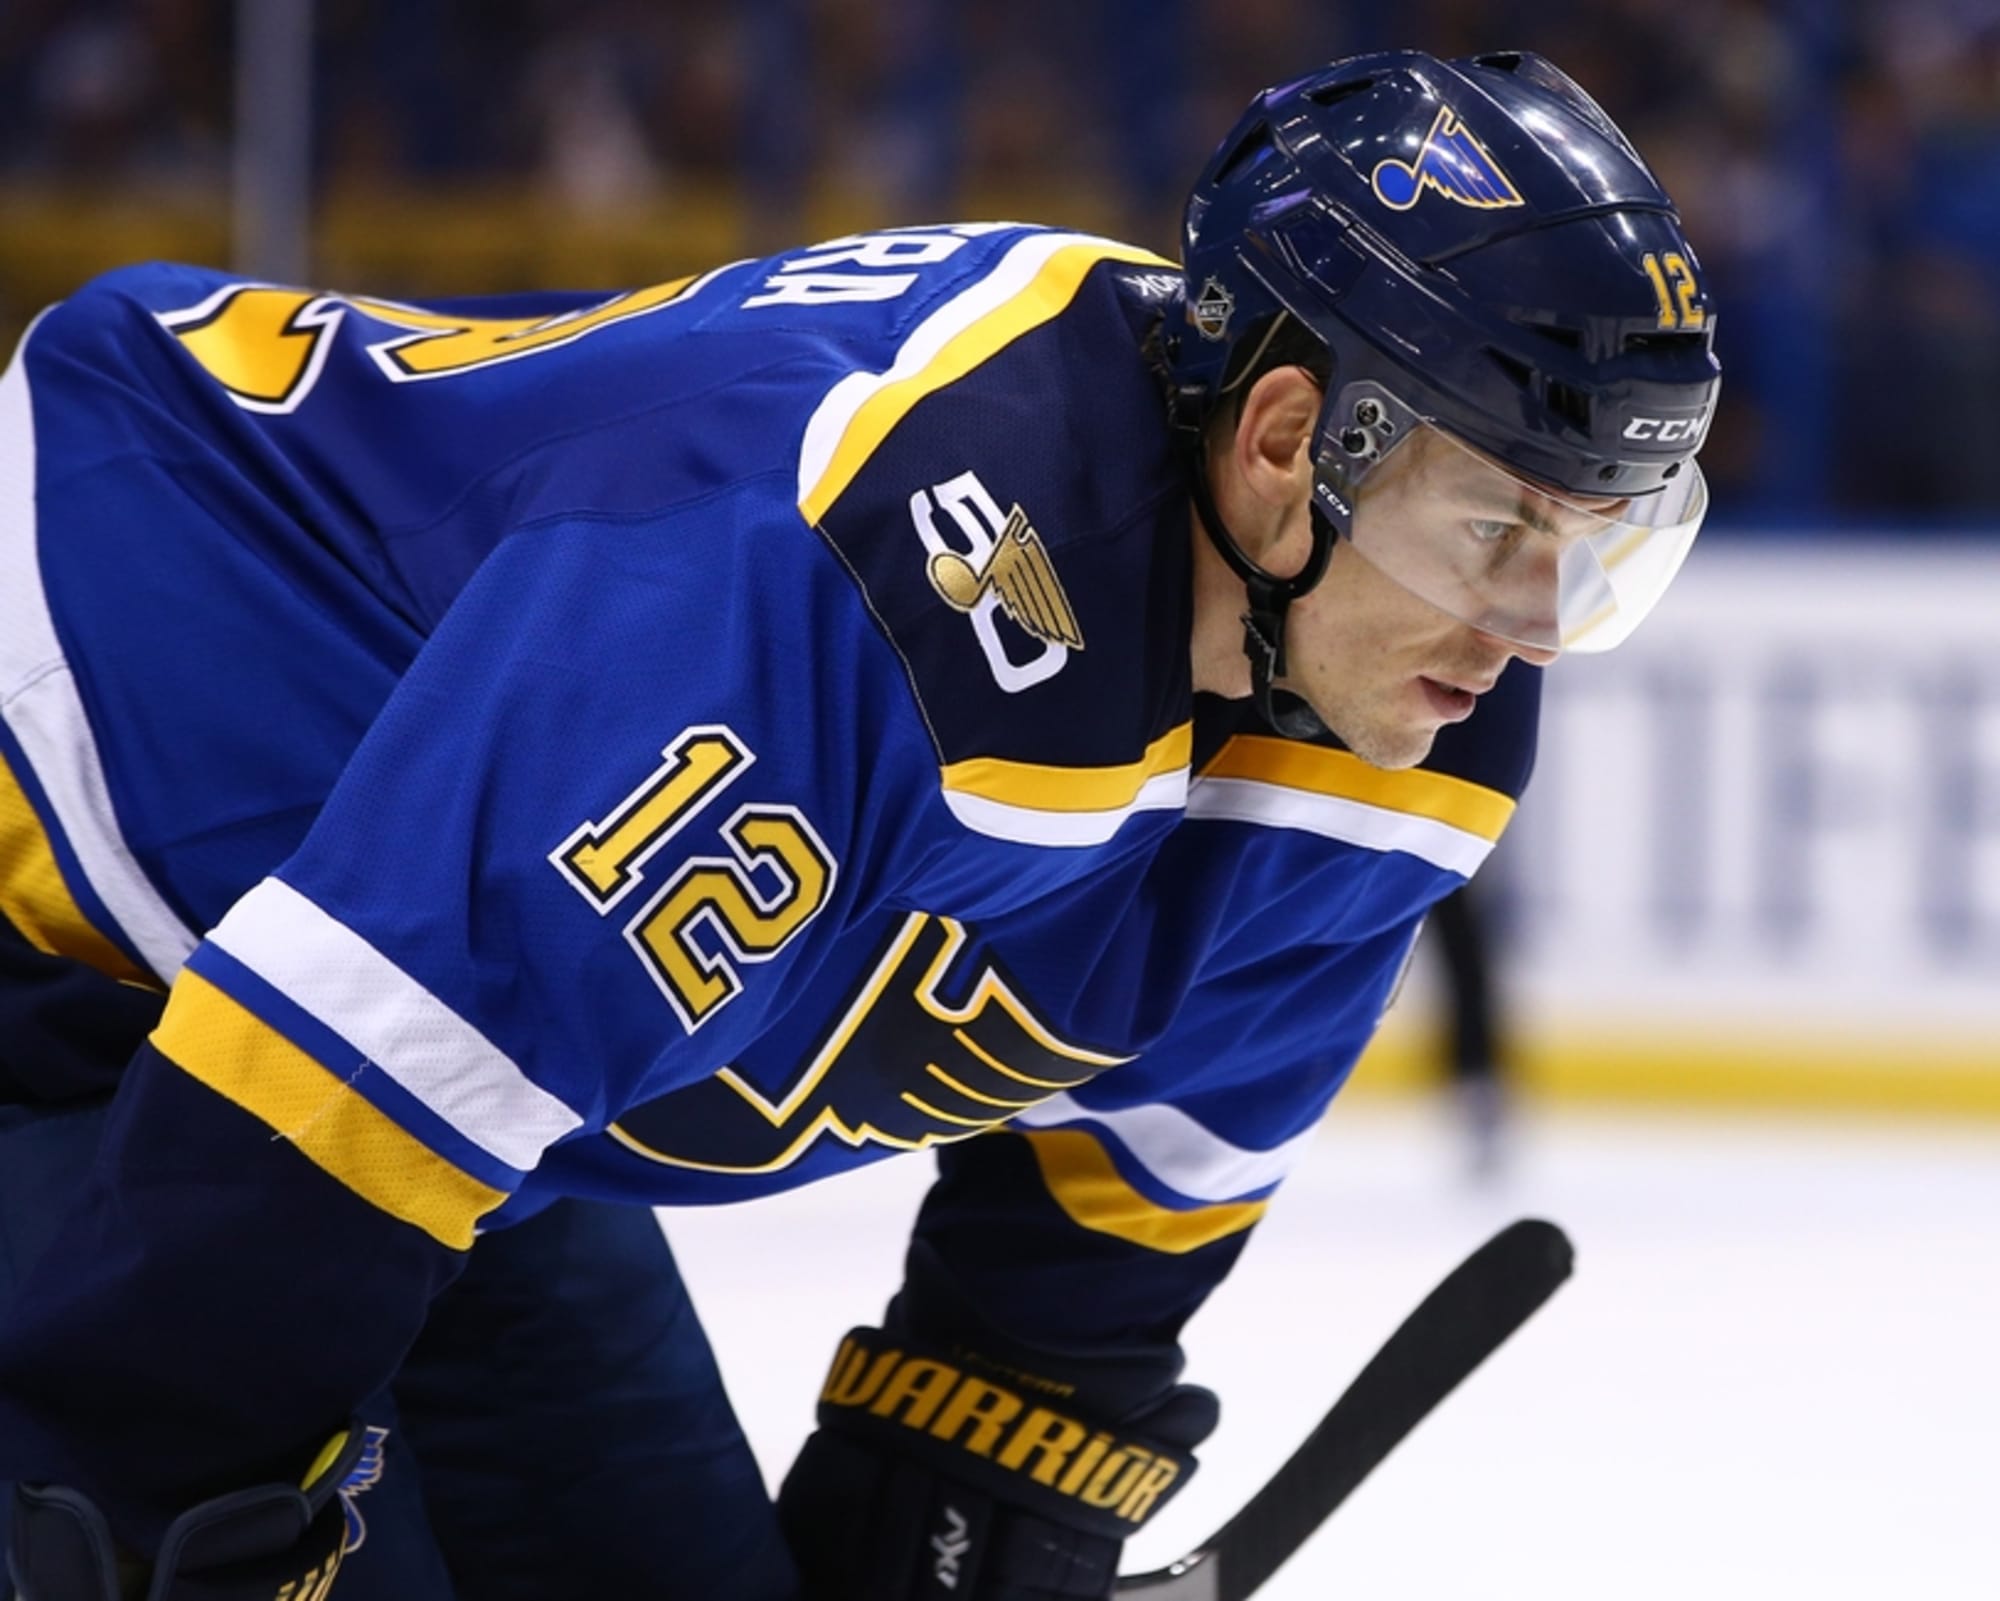 Did Nail Yakupov Lose His Spot in the St. Louis Blues' Lineup?